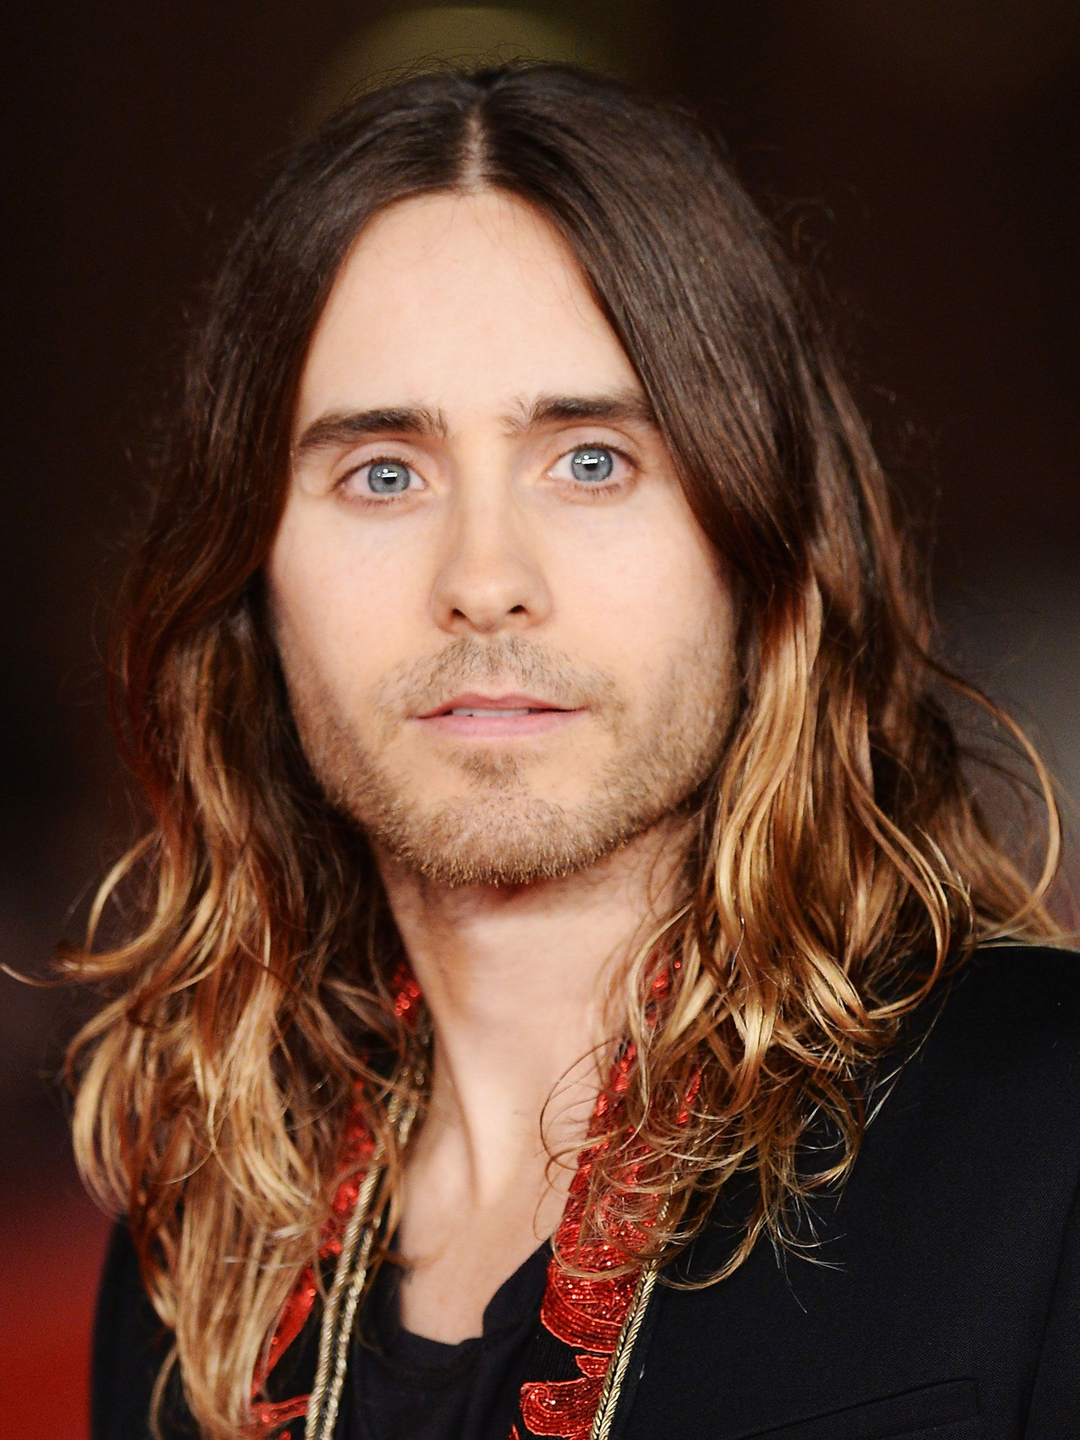 Jared Leto dating history